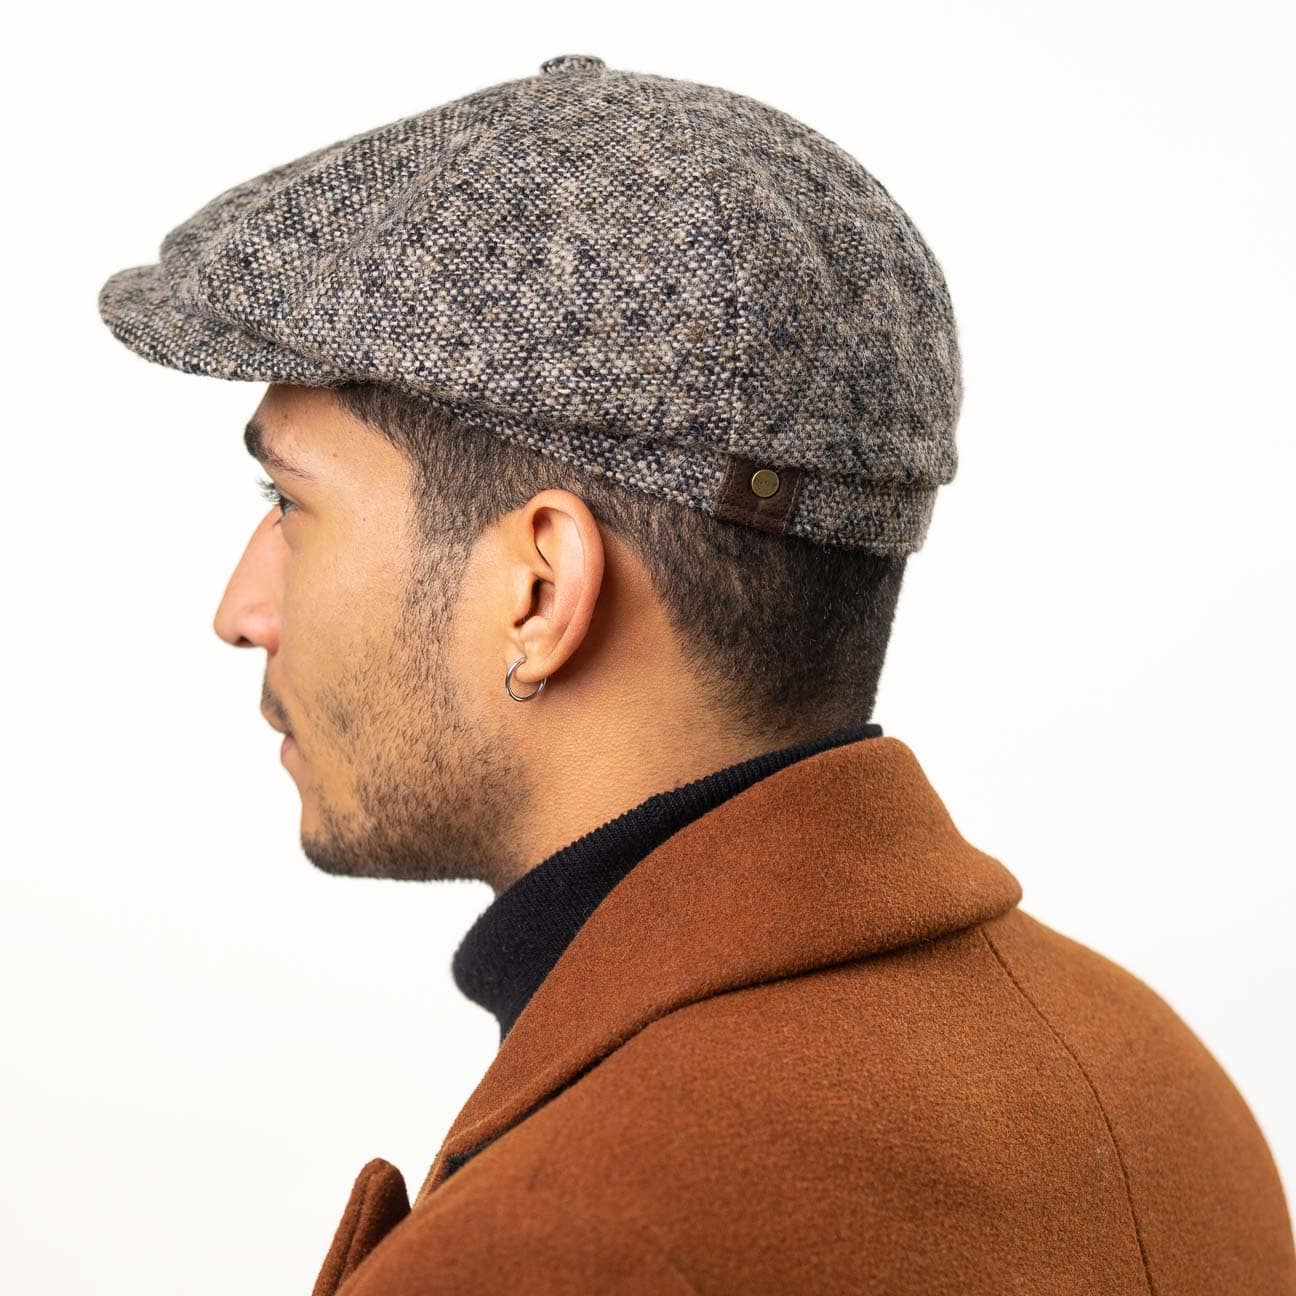 Hatteras Donegal Tweed Cap by Stetson - 119,00